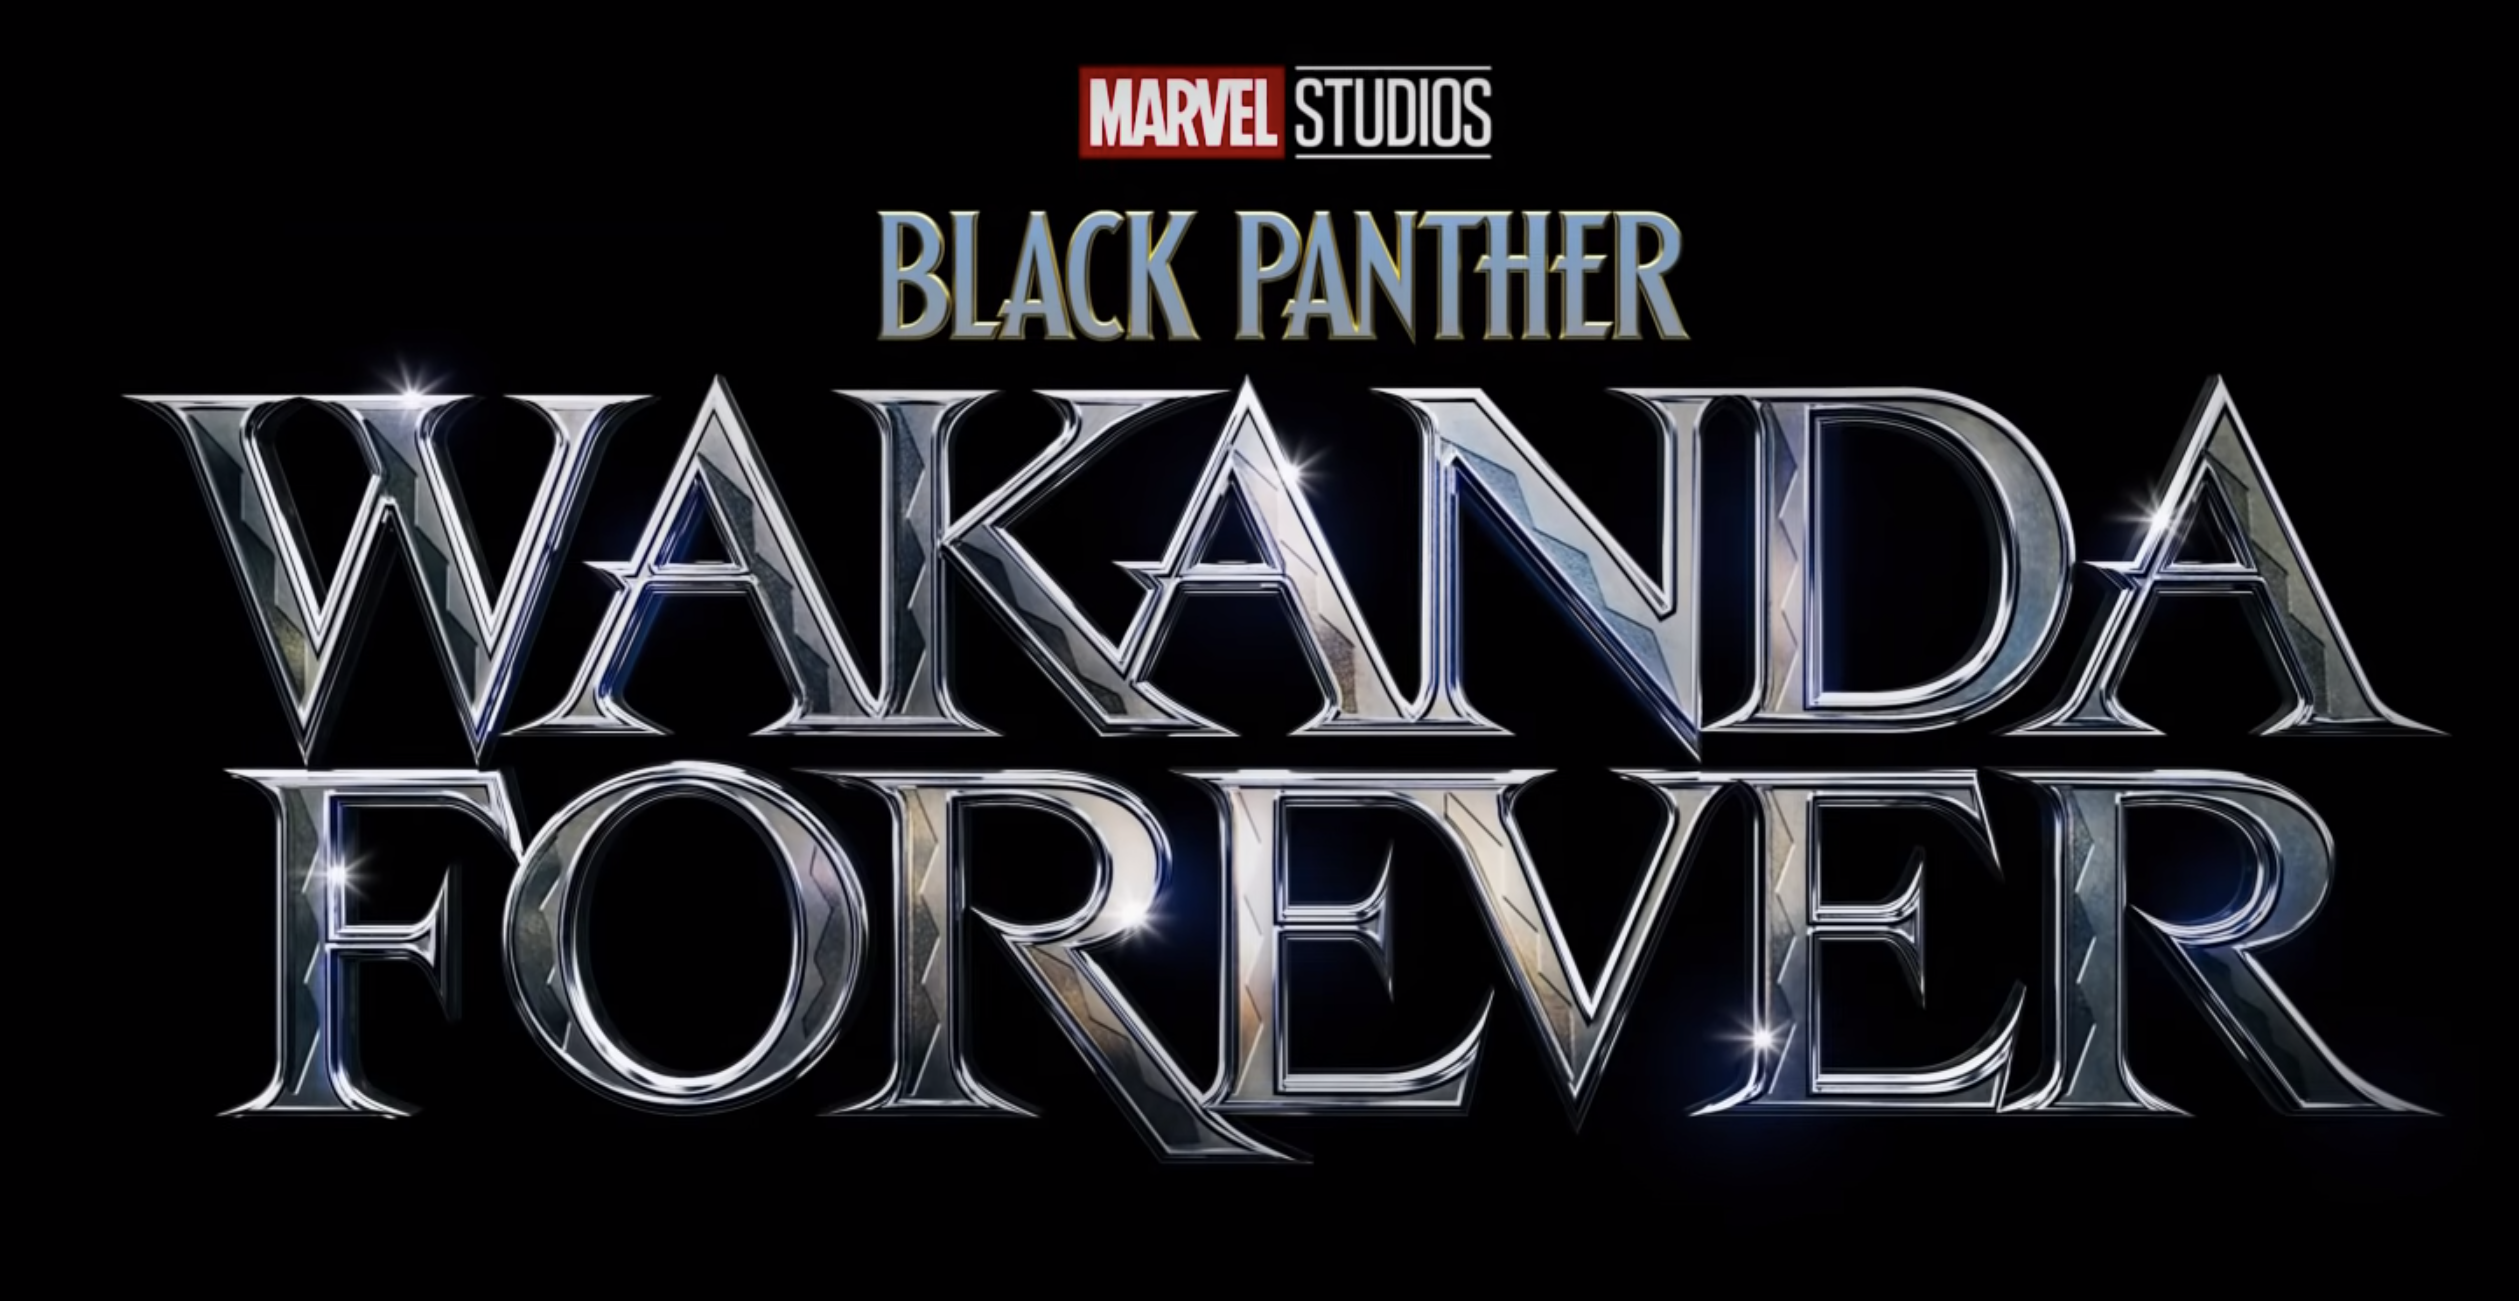 The logo for Black Panther 2 Wakanda Forever, one of the upcoming marvel movies